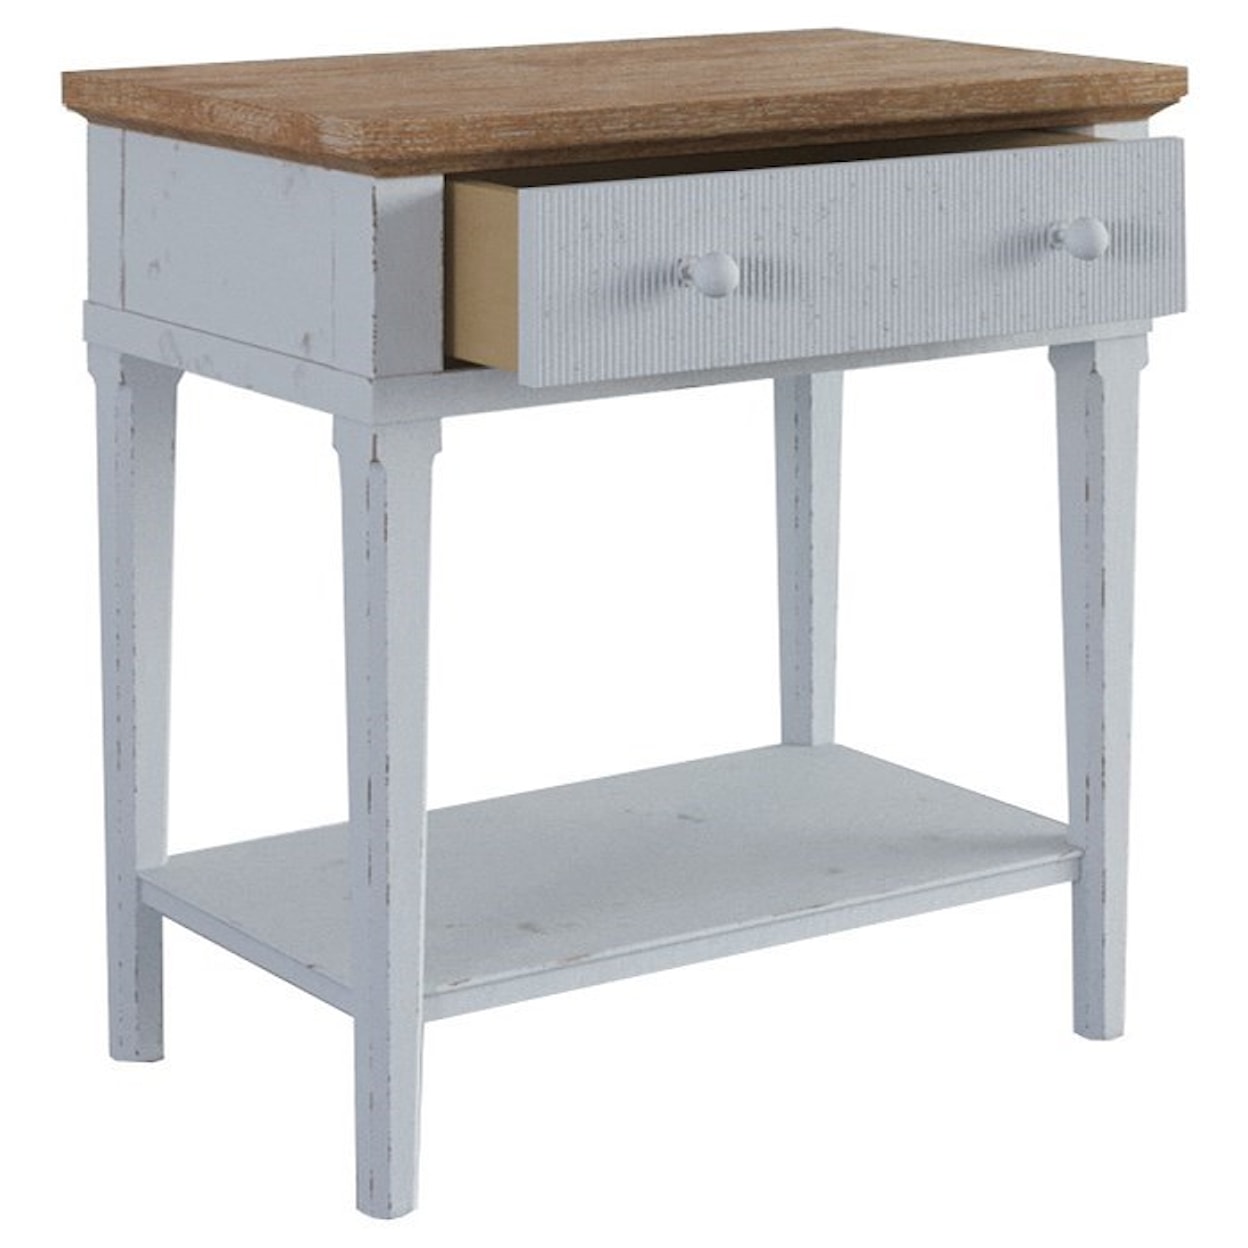 A.R.T. Furniture Inc Palisade Nightstand